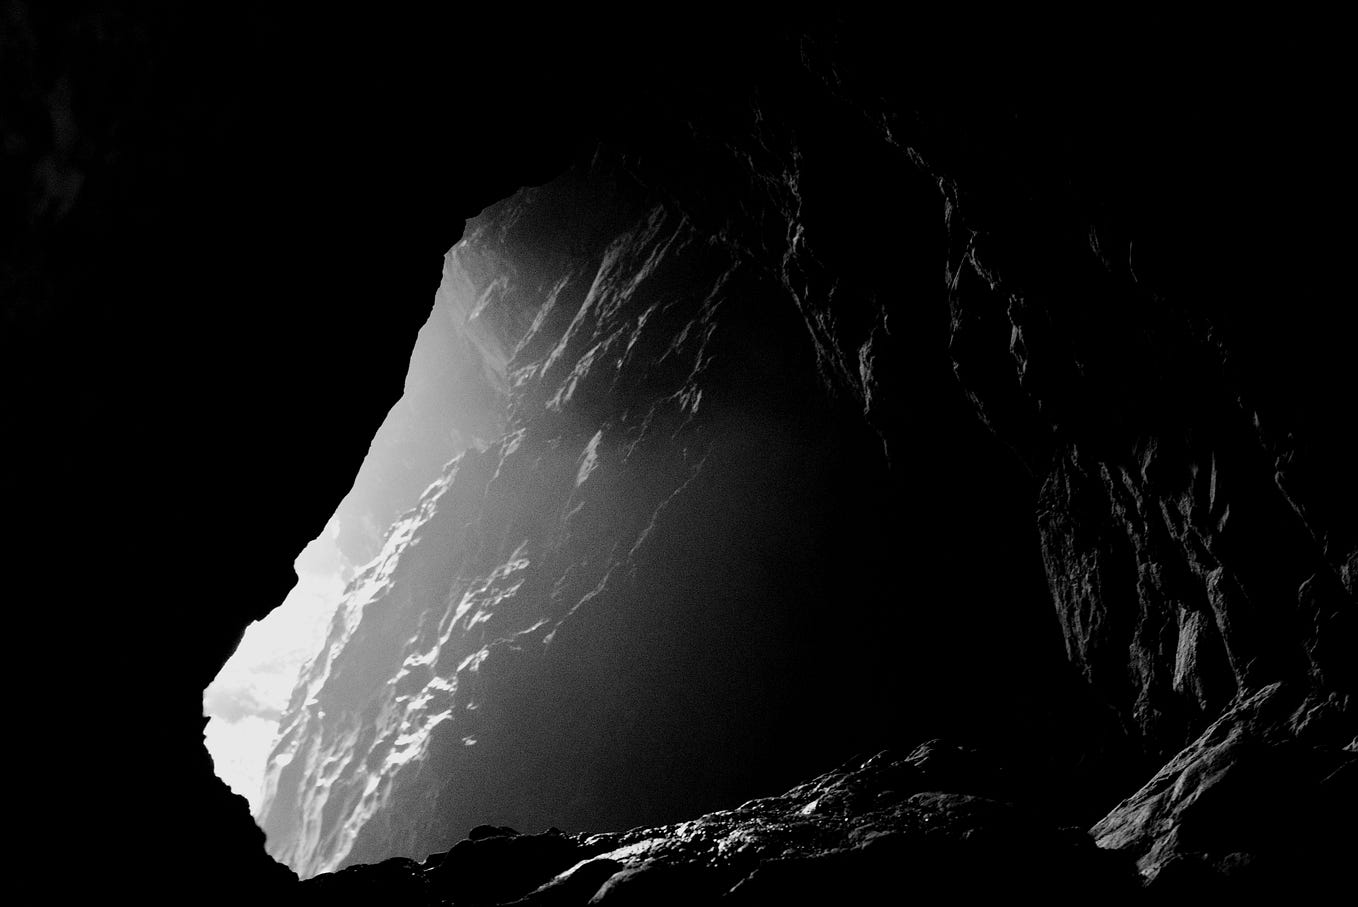 a cave entrance from the inside. bright light illuminates craggly rocks.